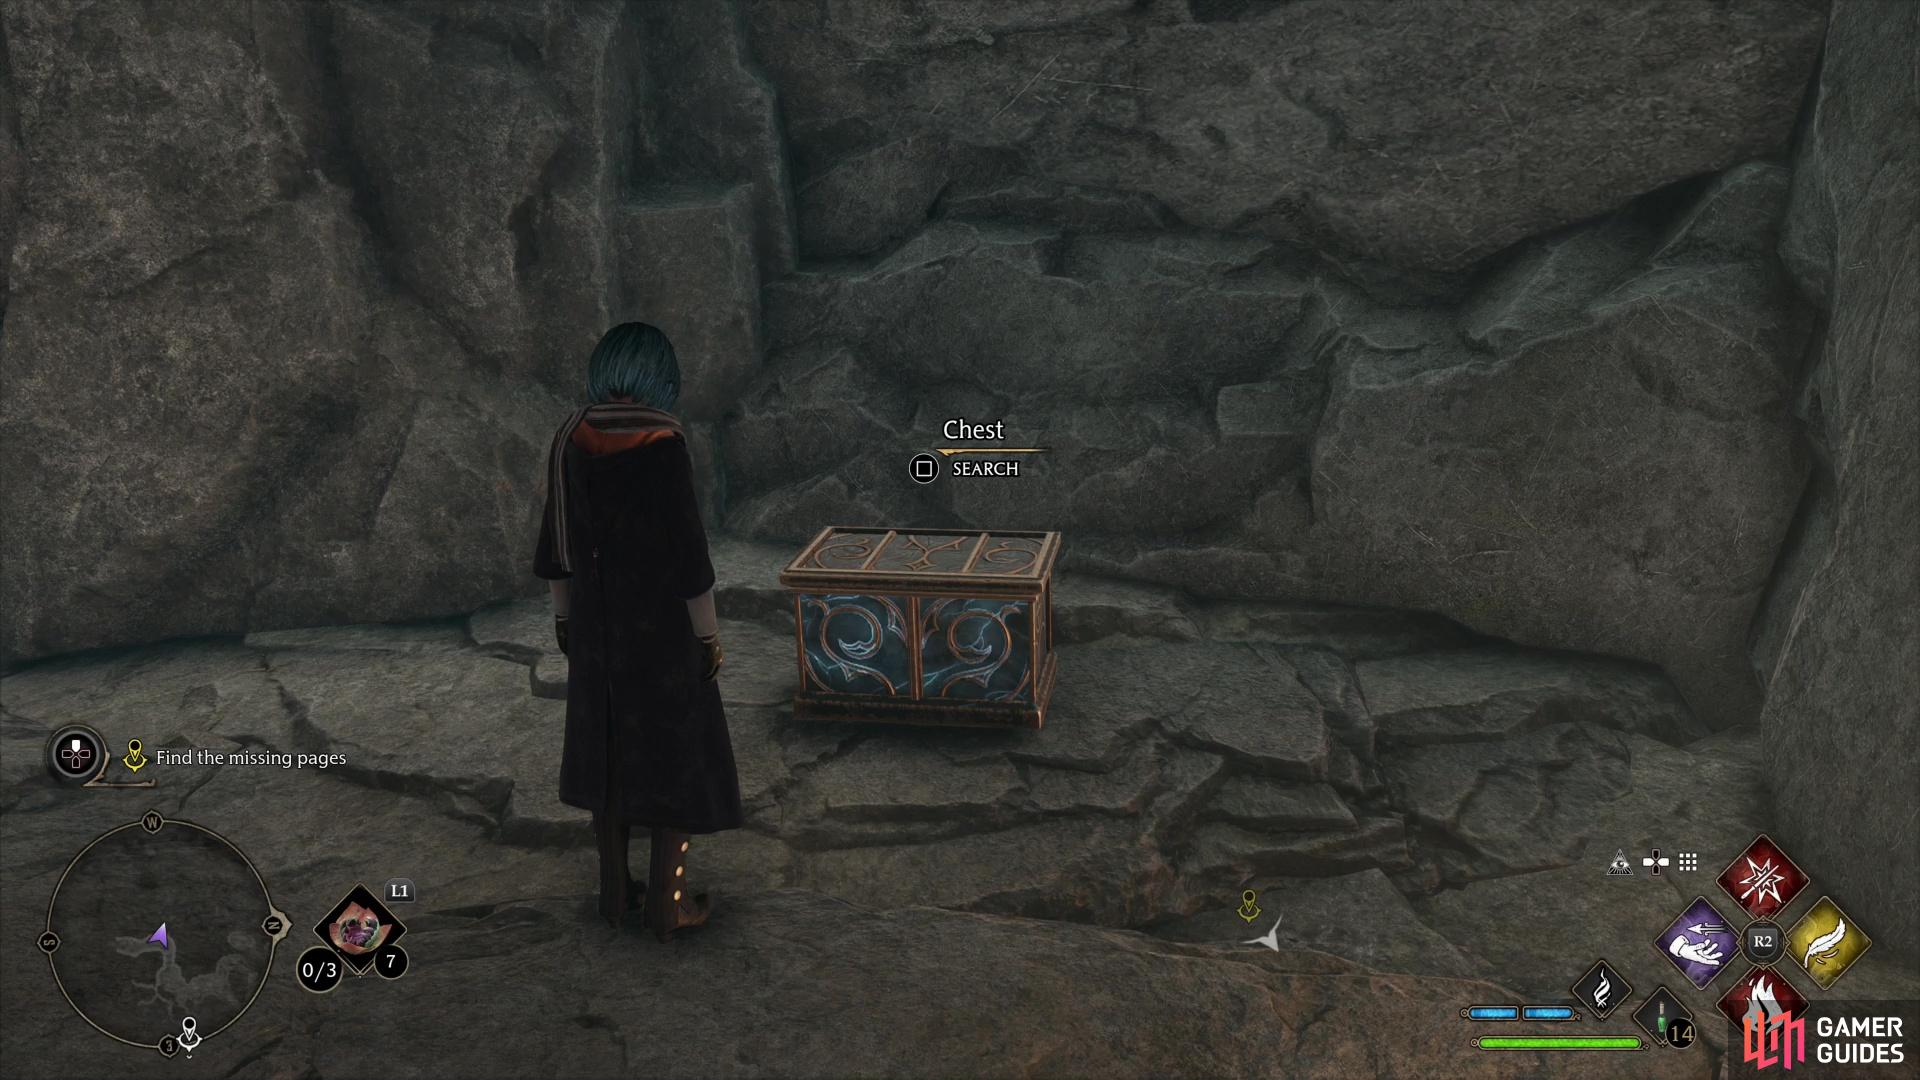 then loot a third small chest.